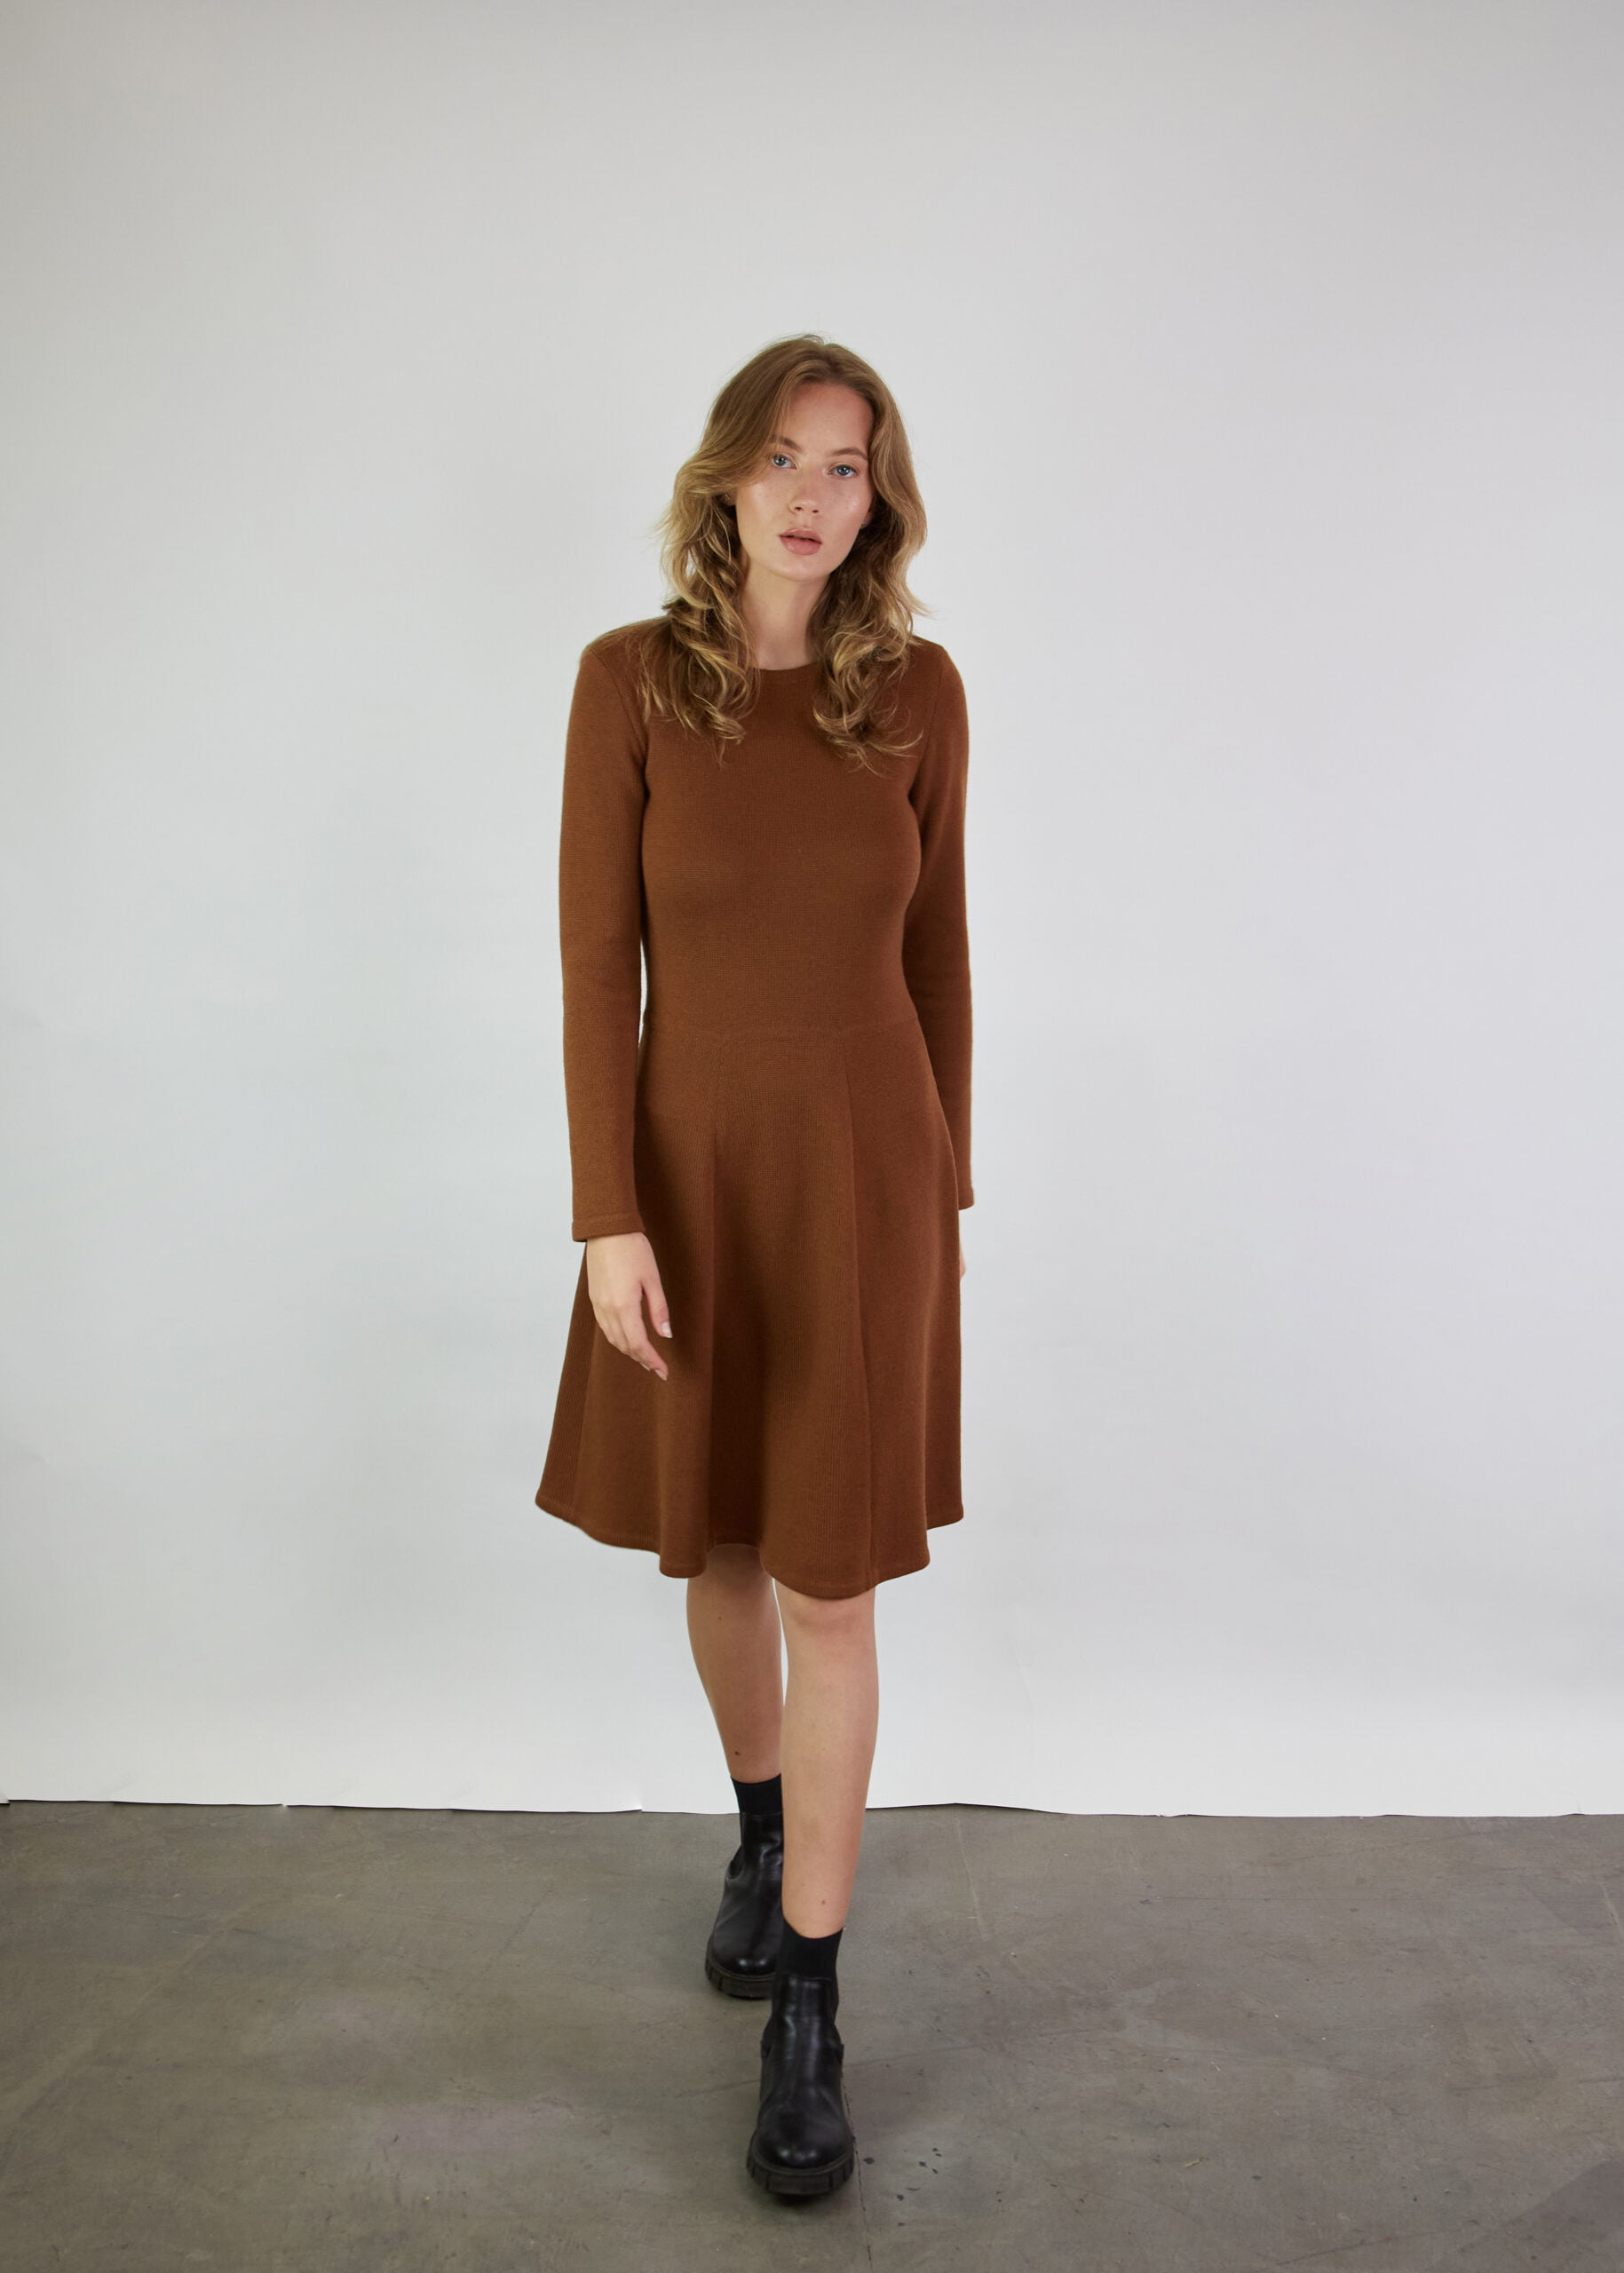 Brown merino wool dress with a fitted waist and a fluid half-circle skirt.